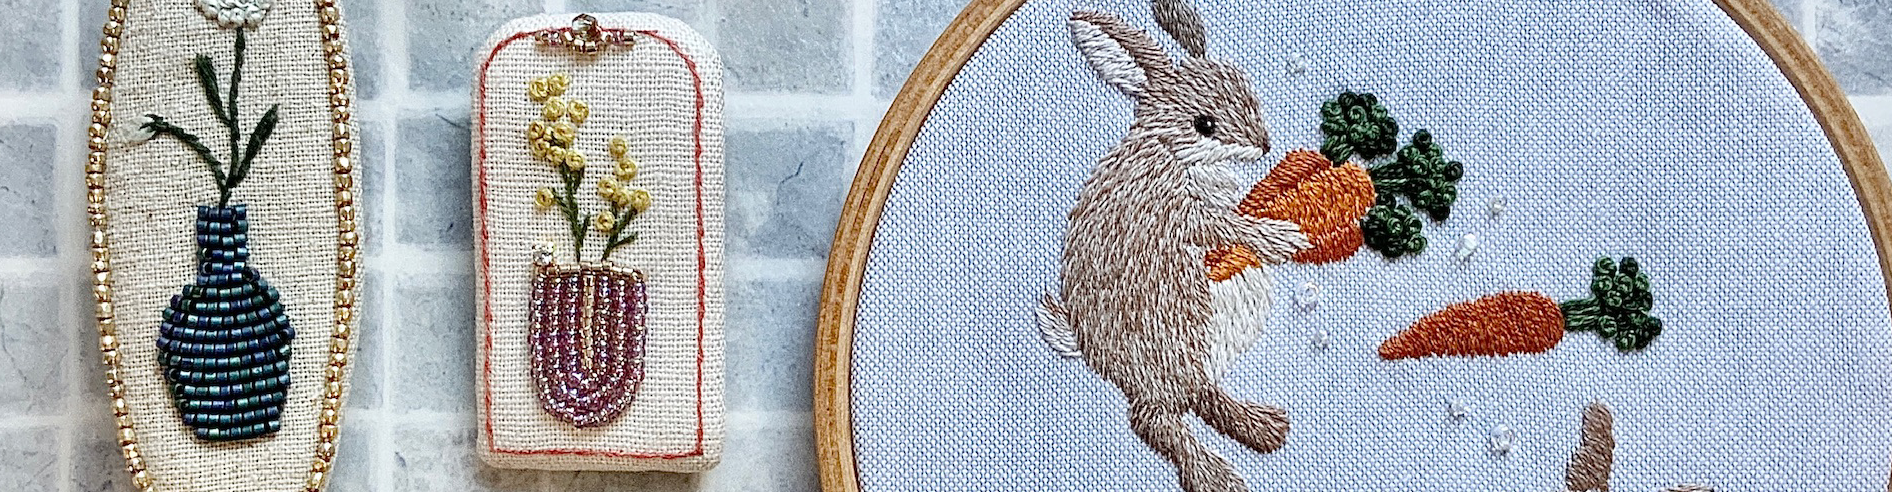 Animal embroidery forum